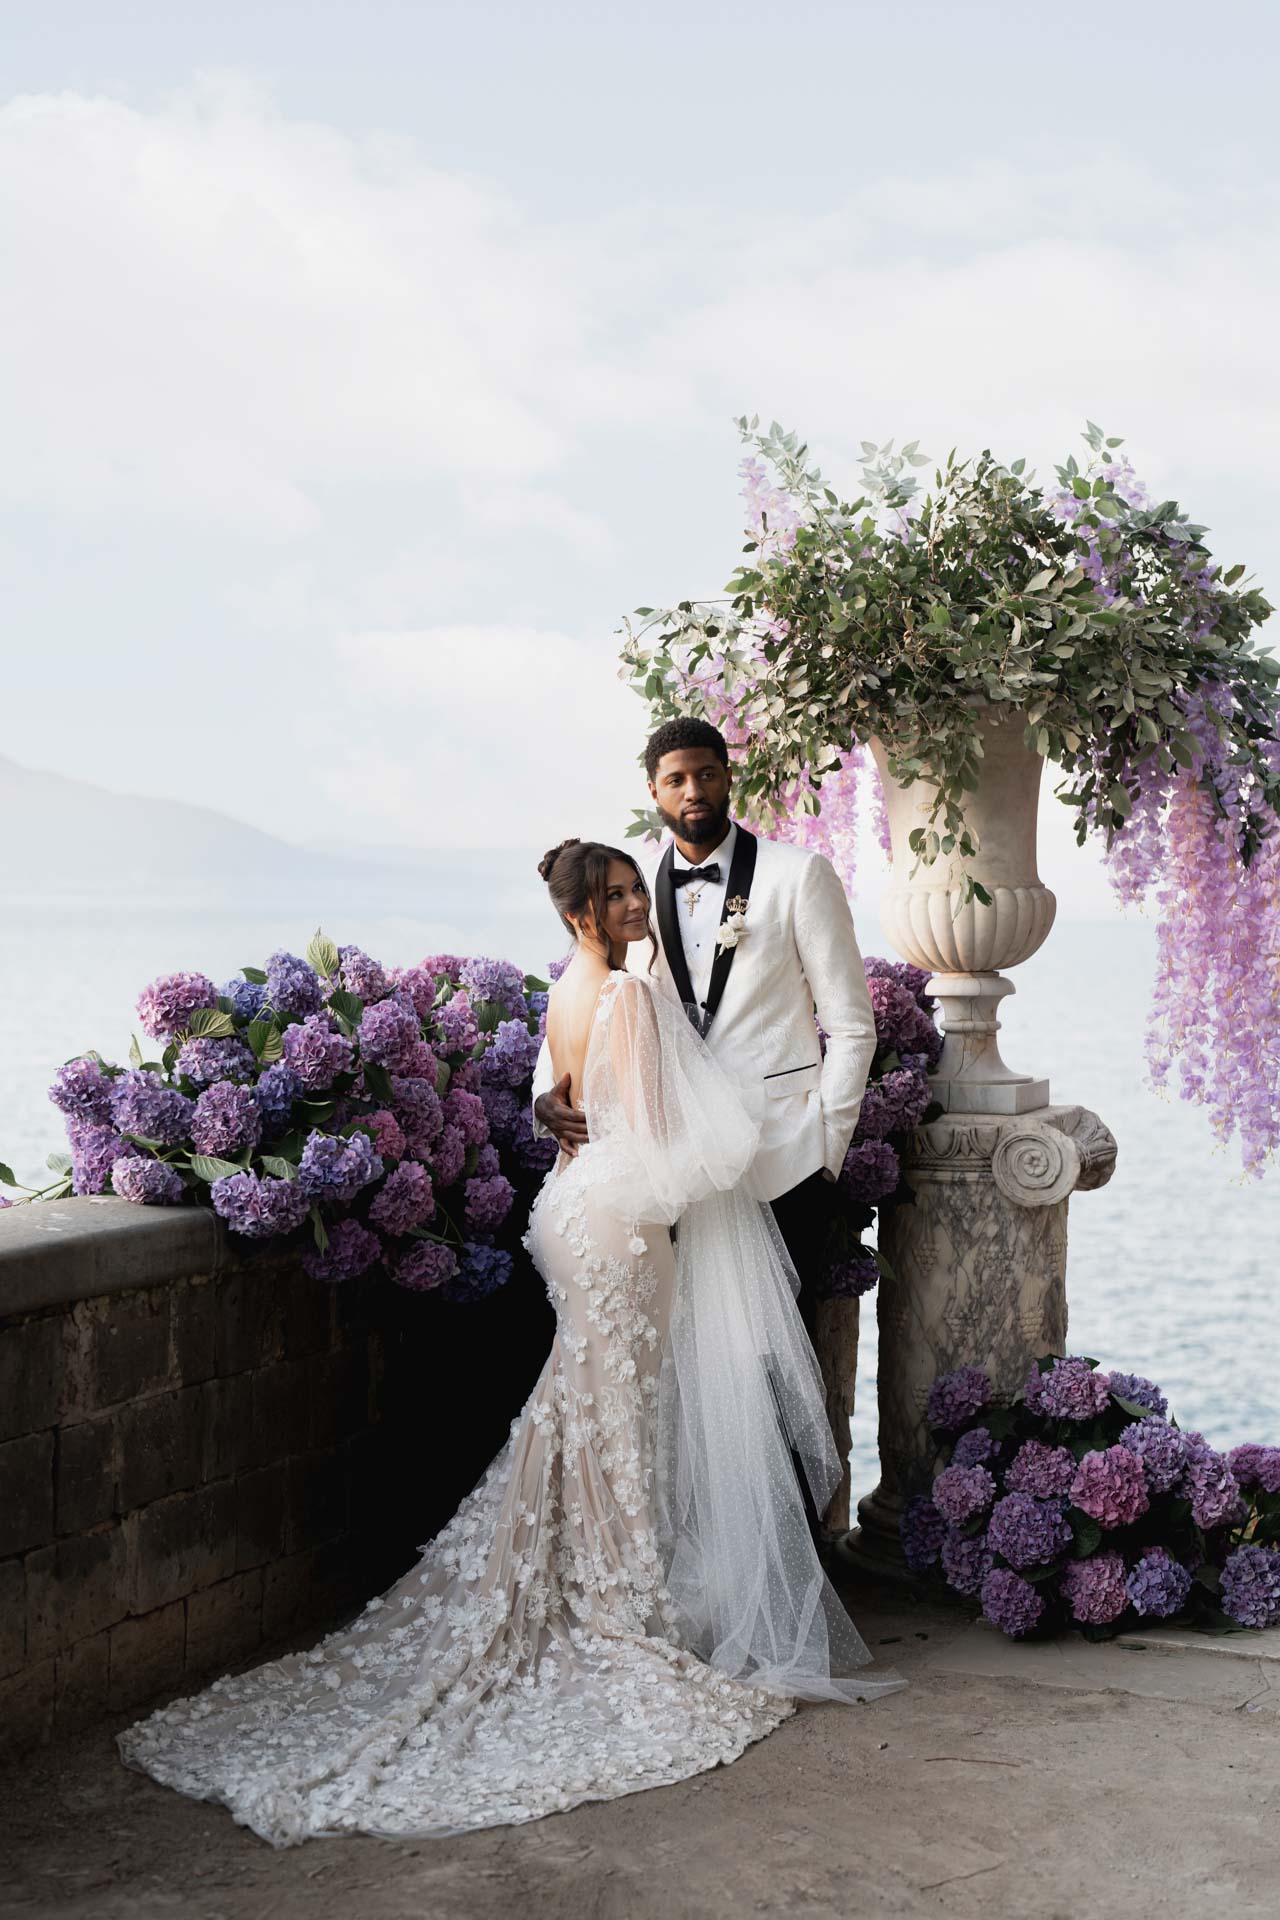 Say ‘I Do’ to the Perfect Day at Villa Astor :: 46